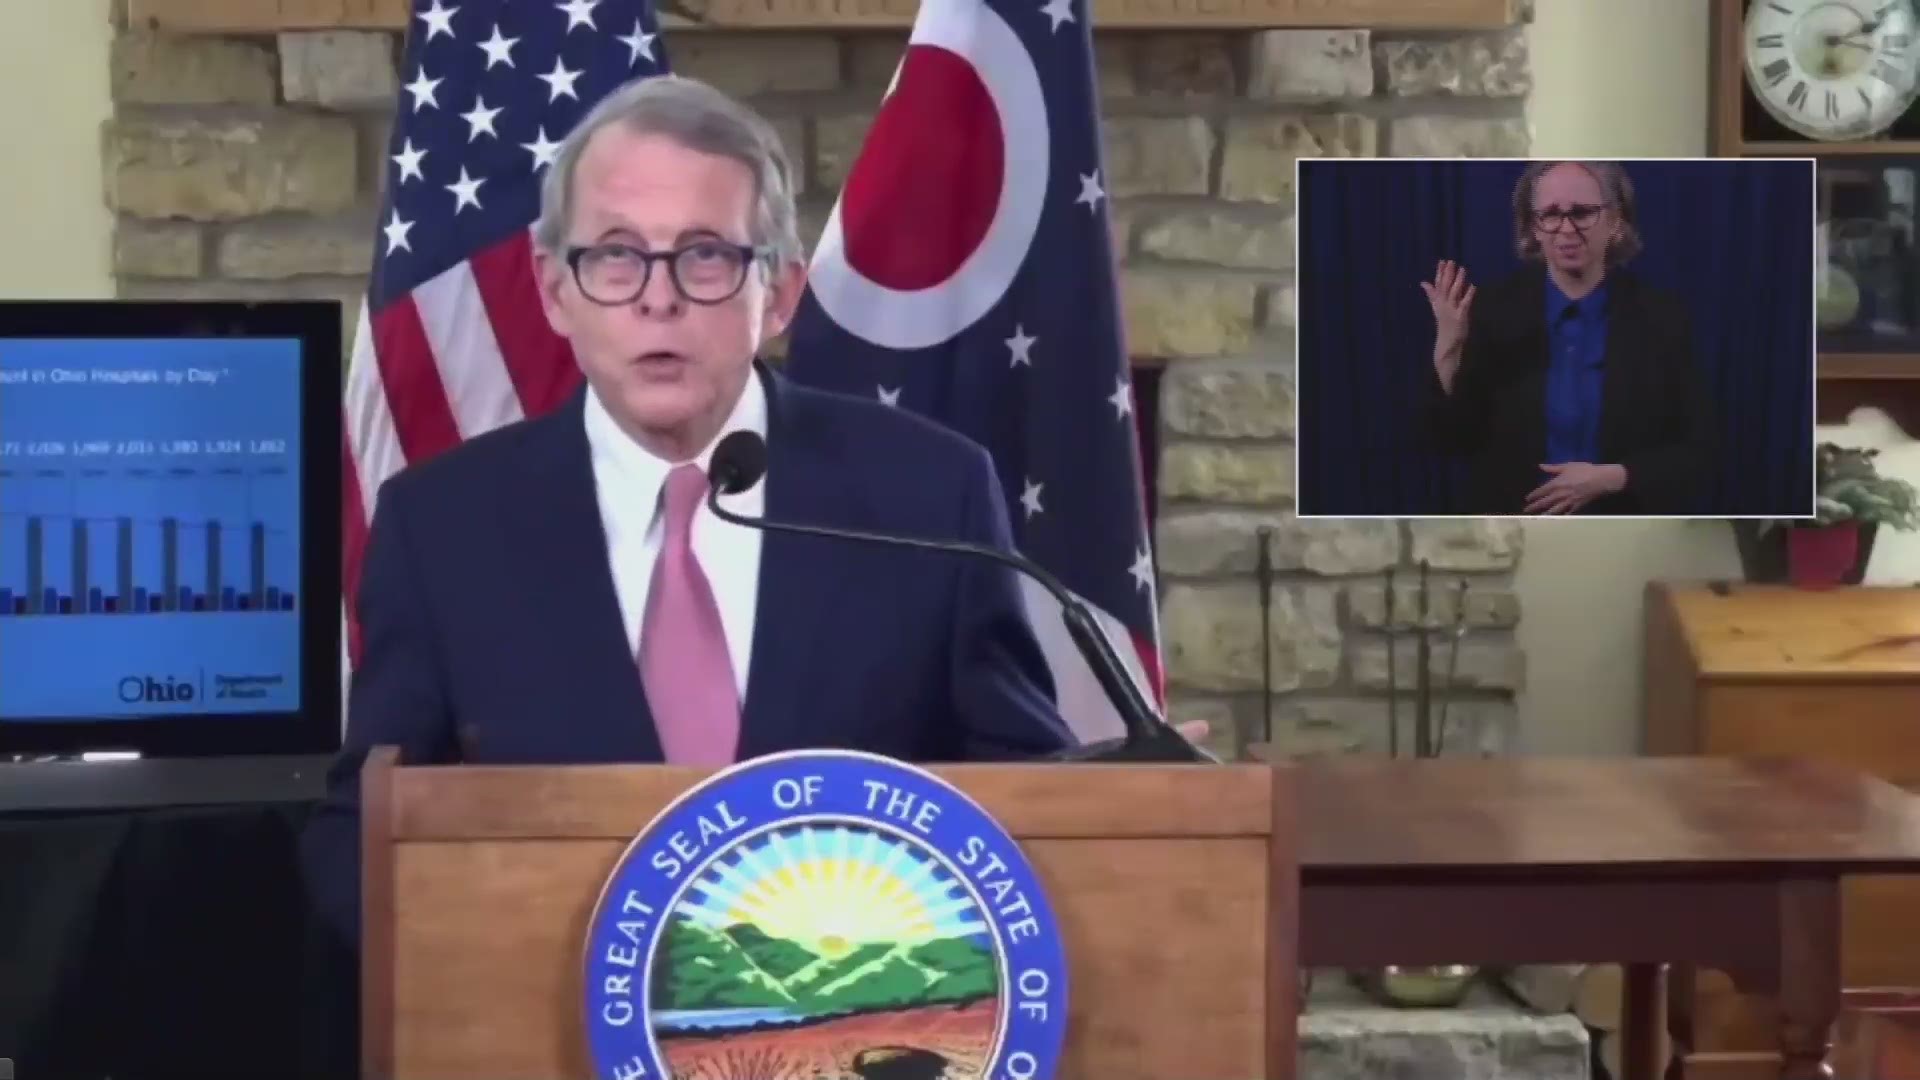 Ohio Governor Mike DeWine announced on Thursday that the state has dropped its COVID-19 curfew.